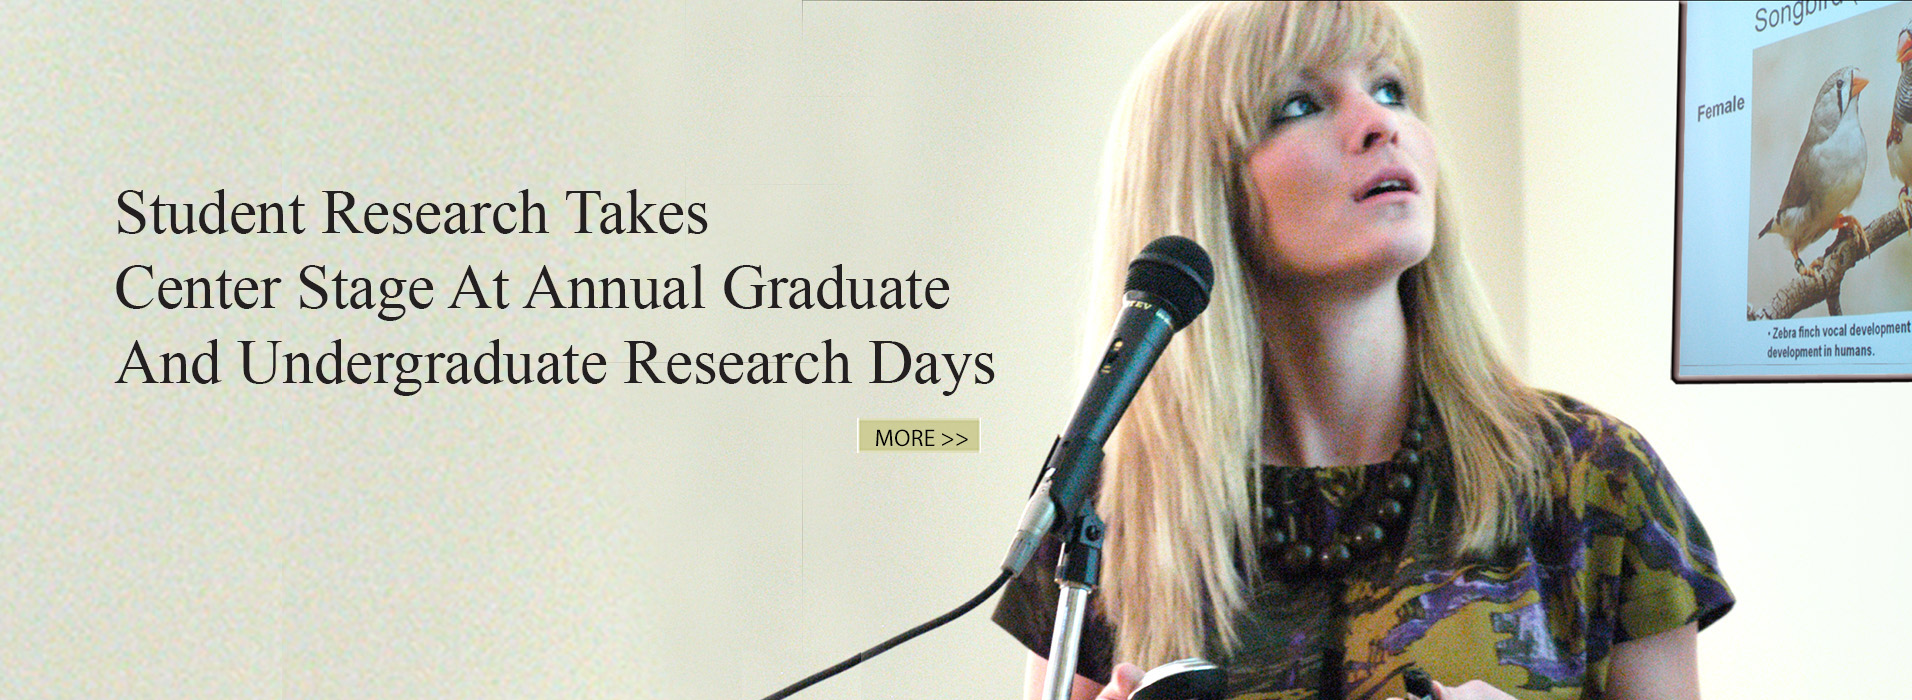 Student Research Takes Center Stage at Annual Graduate and Undergraduate Research Days